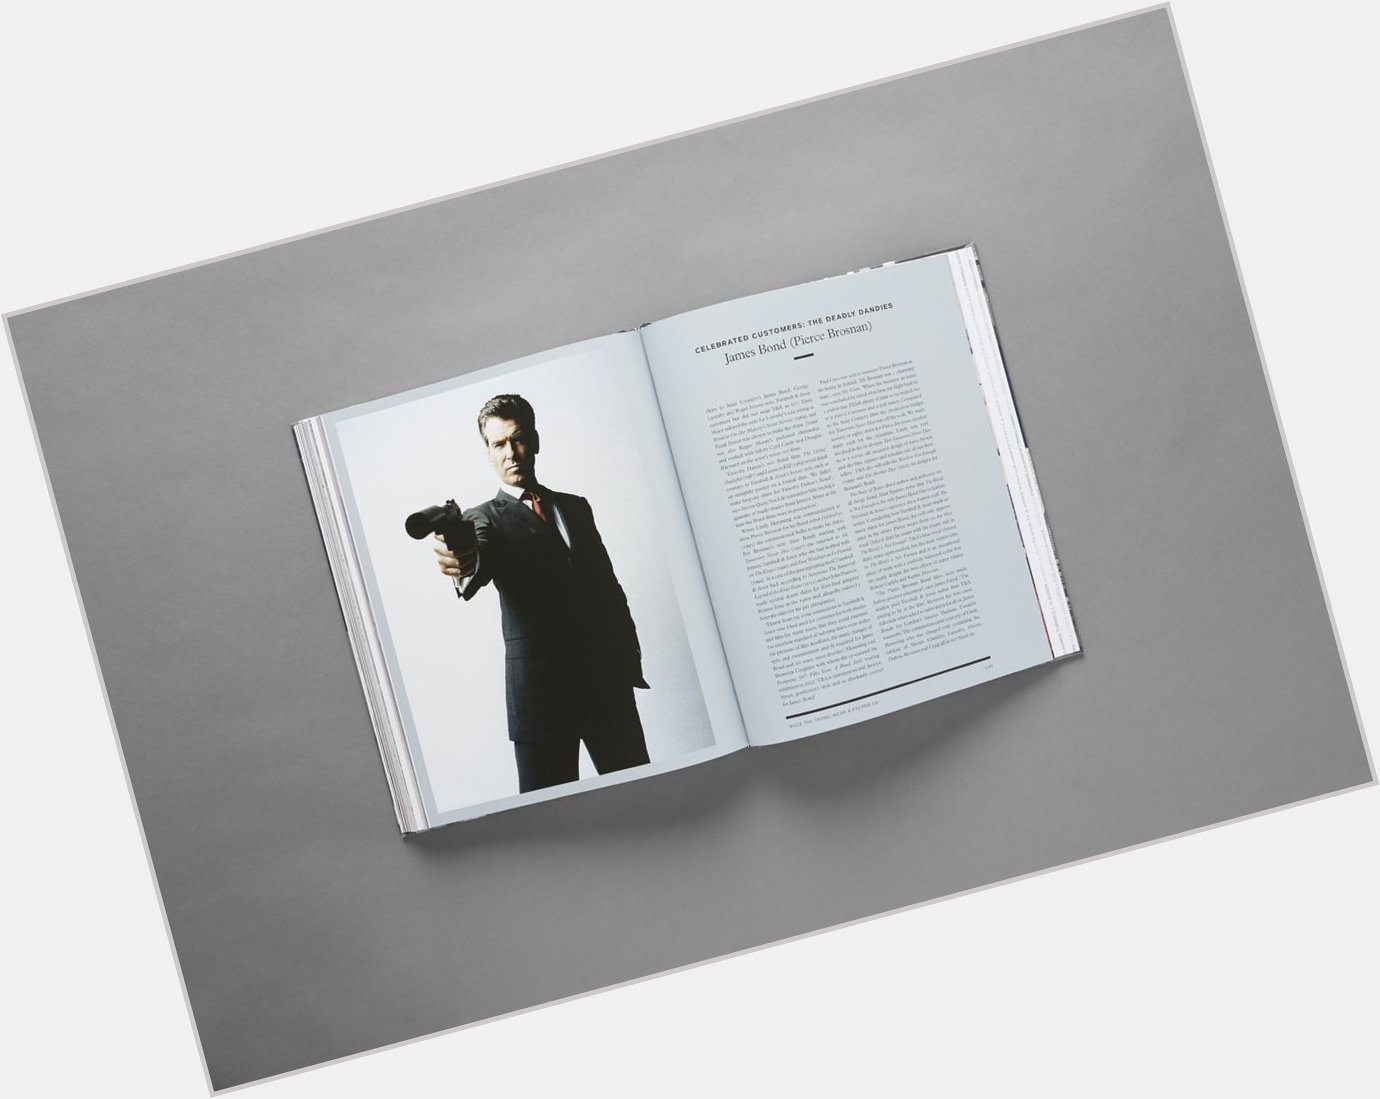 Happy birthday to another 007 Pierce Brosnan. Read all about him in our archive book:  